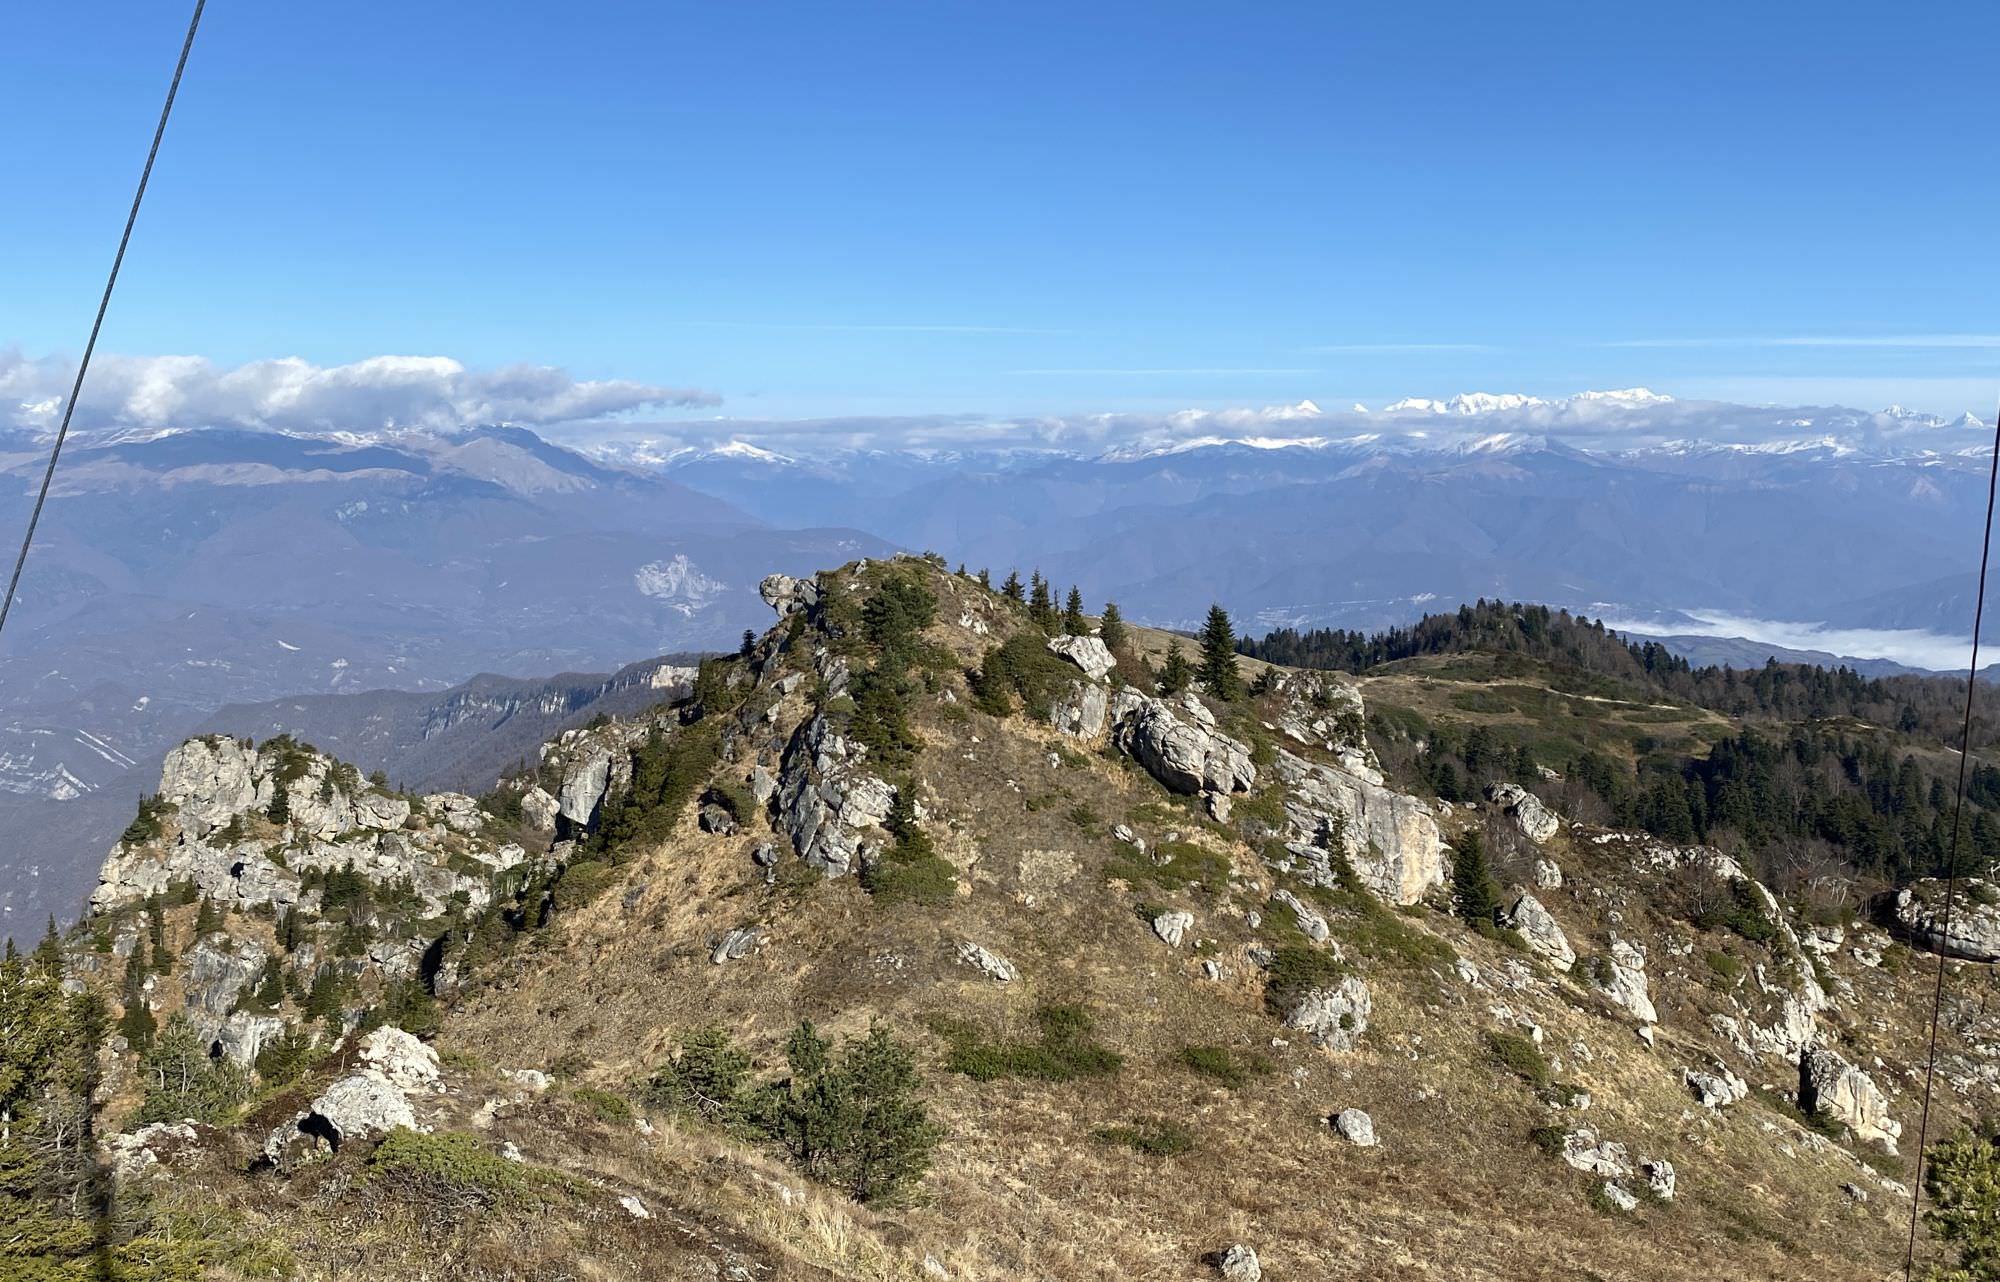 View from the peak towards the Greater Caucasus